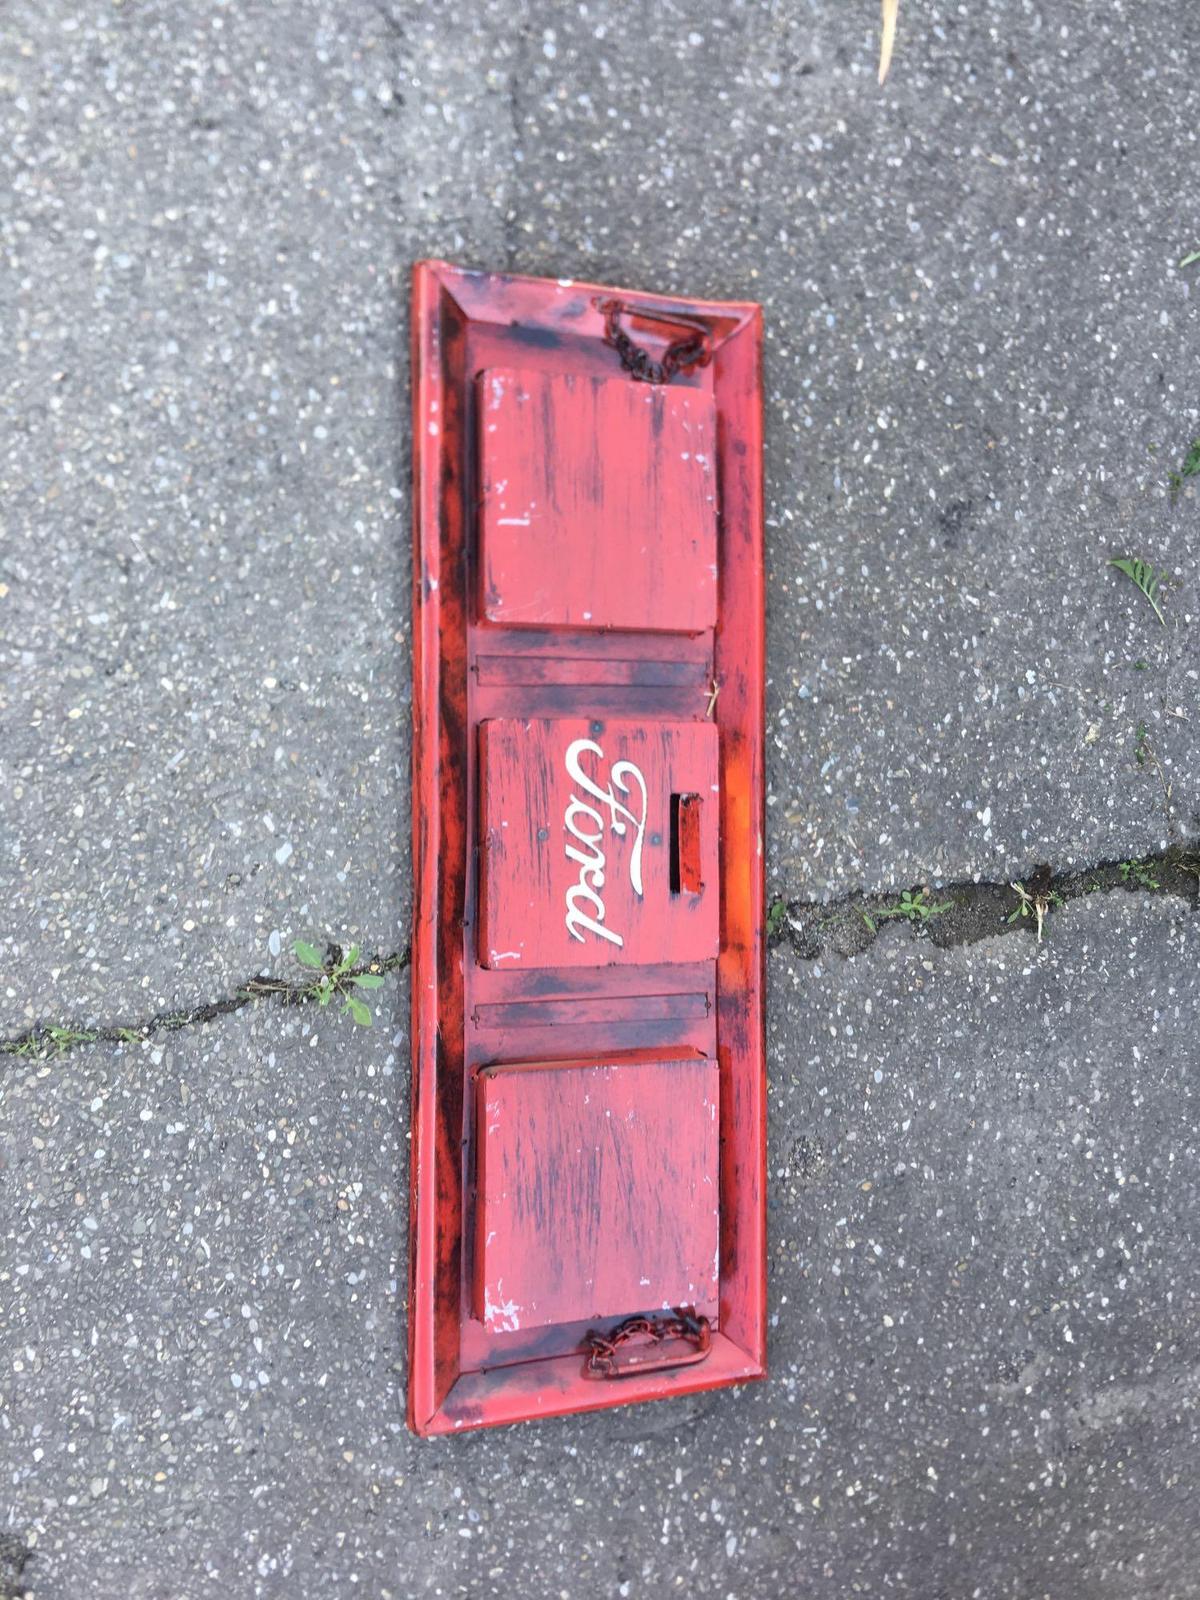 Ford tail gate